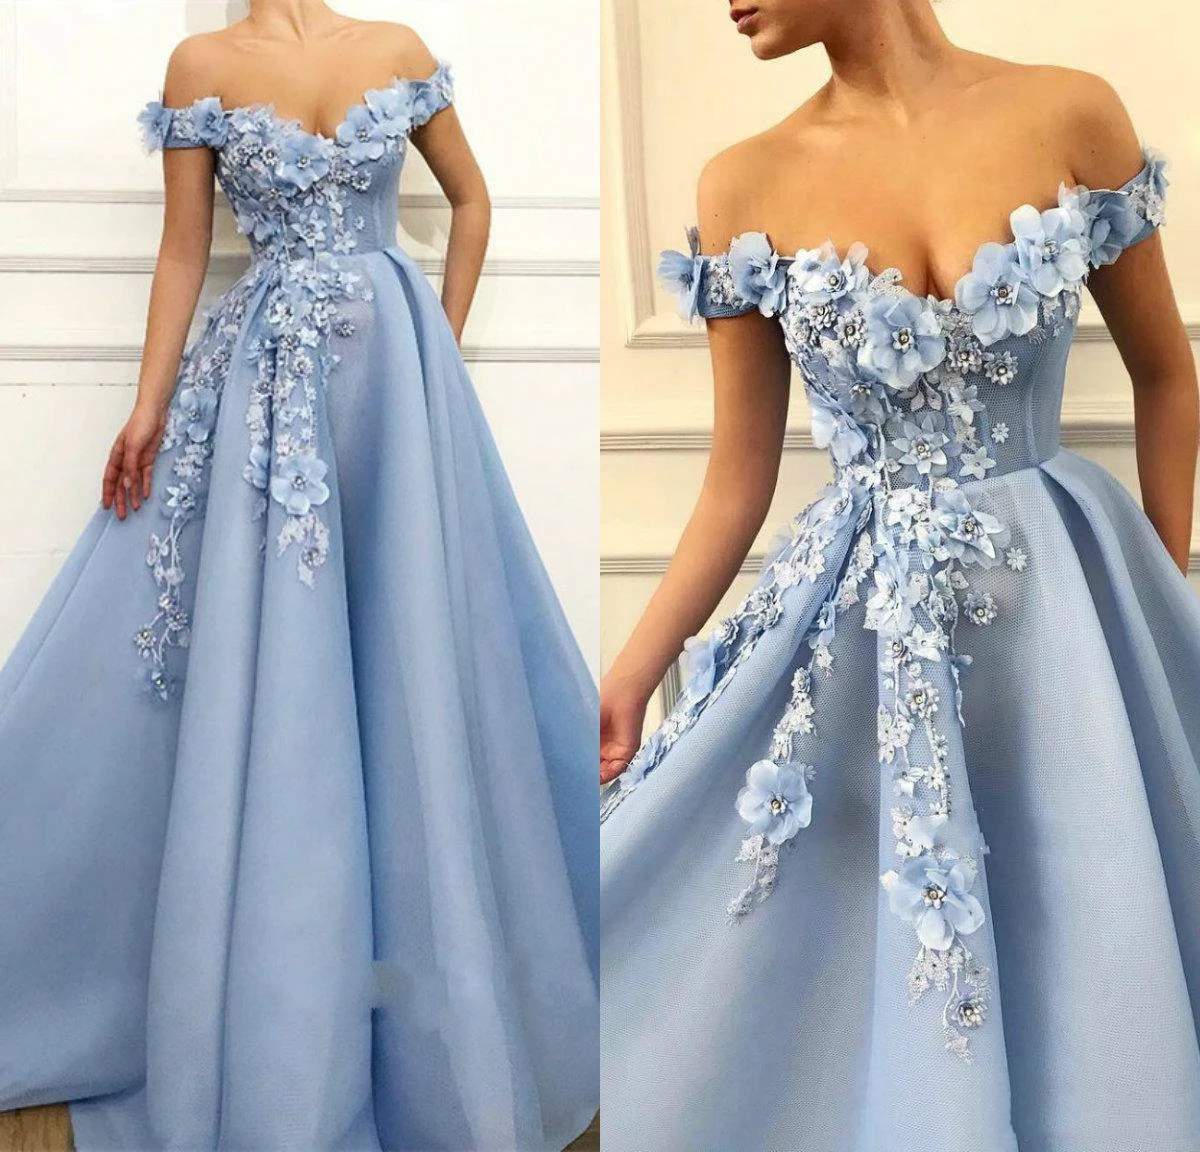 

Elegant A Line Sky Blue Prom Dresses Lace 3D Floral Appliqued Pearls Evening Dress Off The Shoulder 2021 Special Occasion Gowns